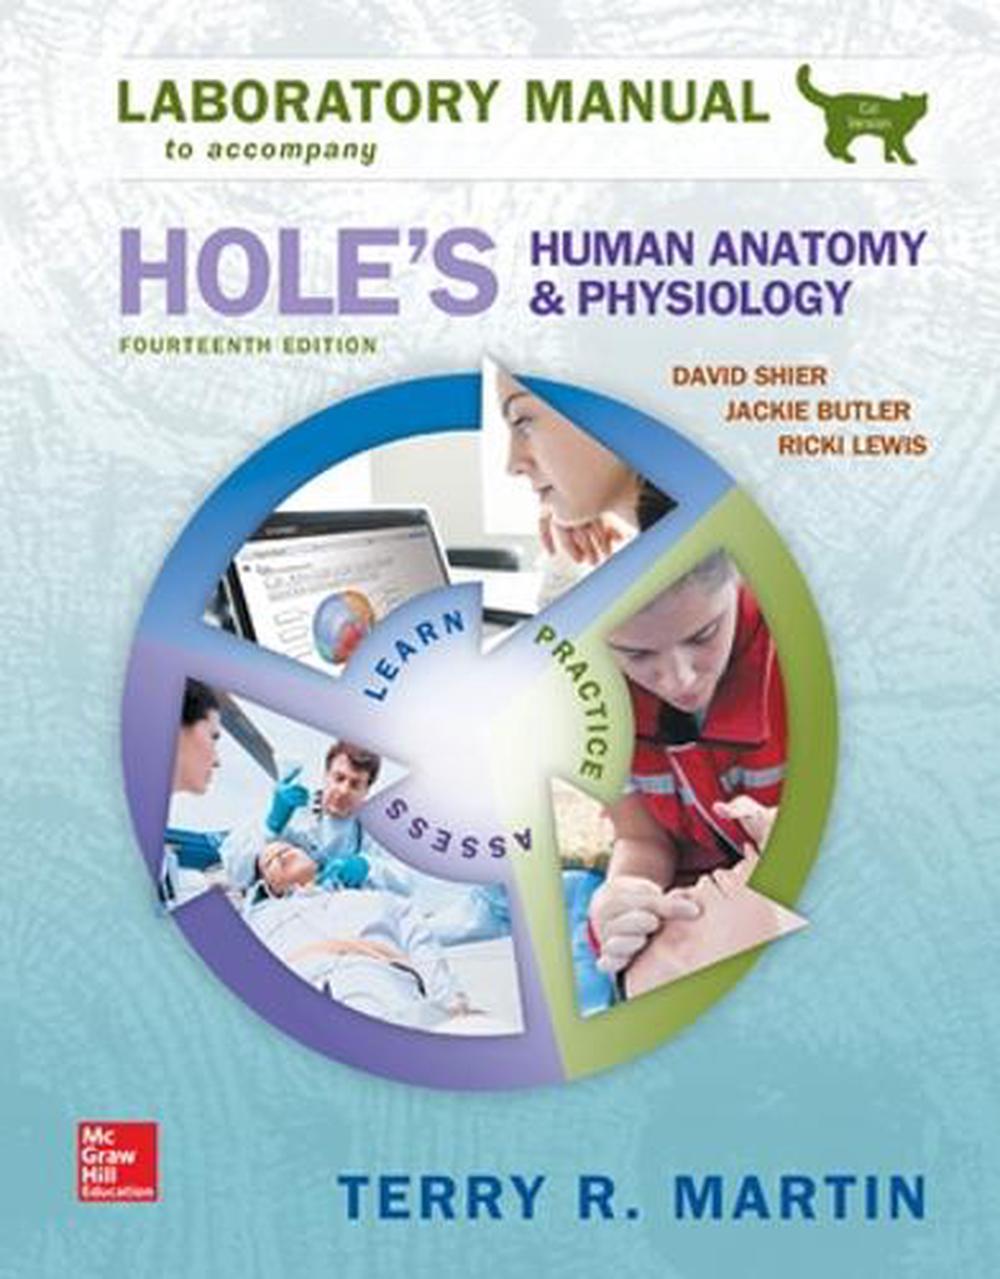 Laboratory Manual for Hole's Human Anatomy & Physiology Cat Version by Terry Mar 9781259295638